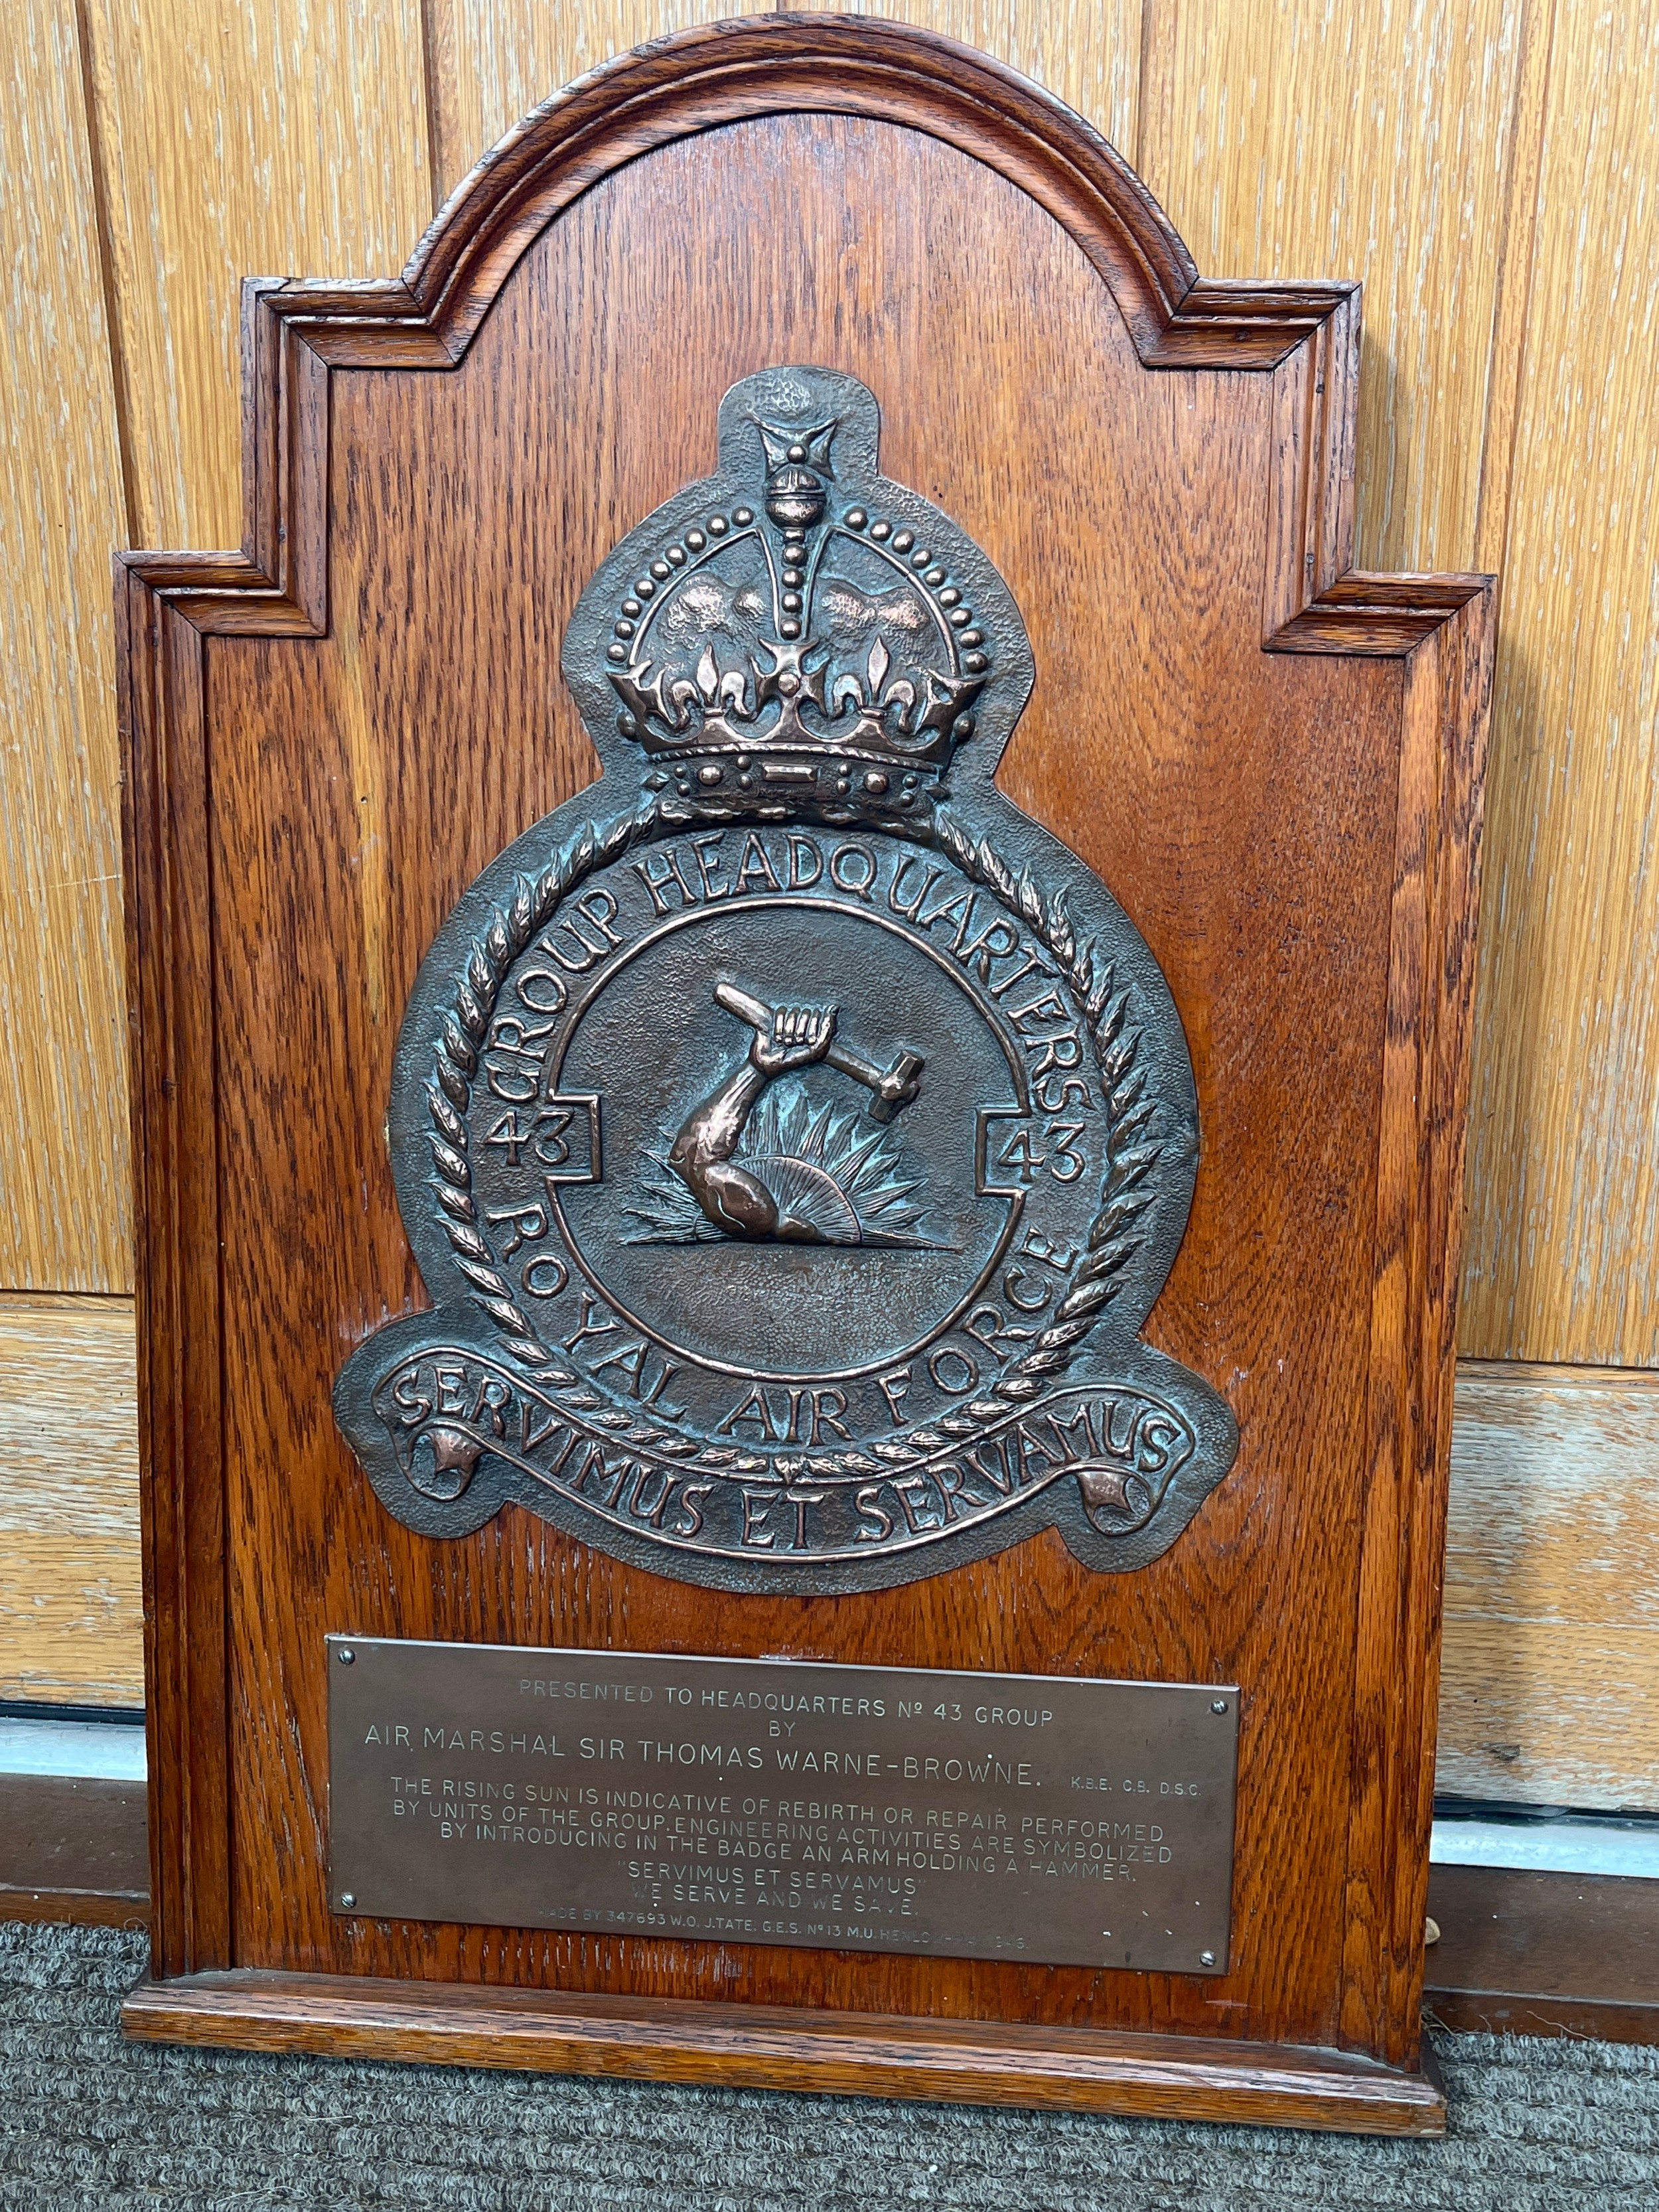 A Group Headquarters No. 43 RAF crest in copper mounted on an oak display, with plaque marked “